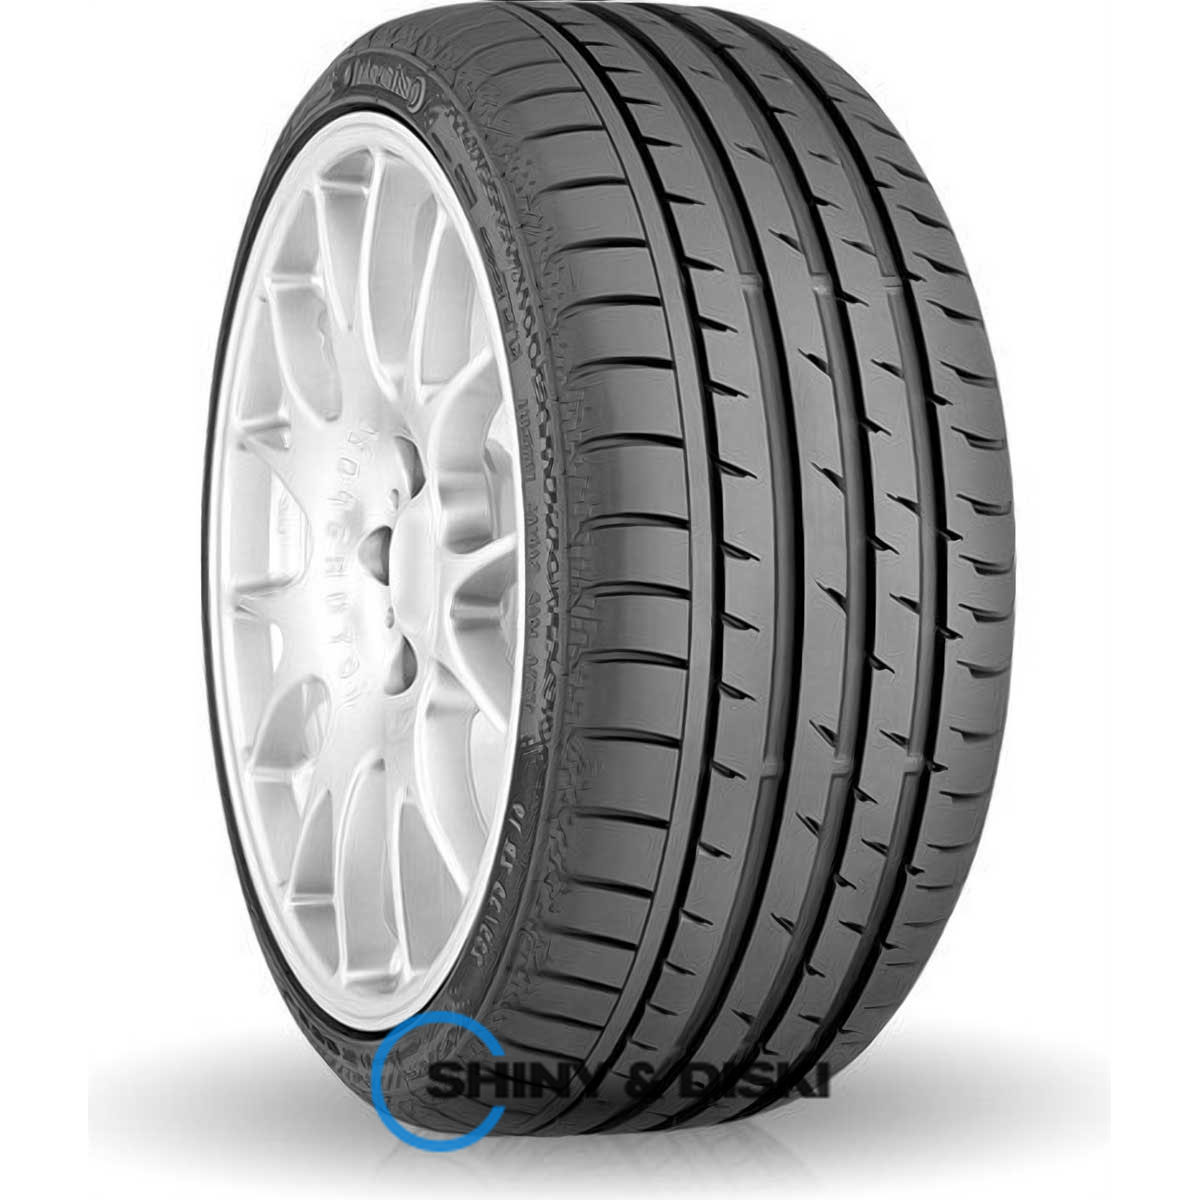 резина continental sportcontact 3 245/40 r18 97y xl mo